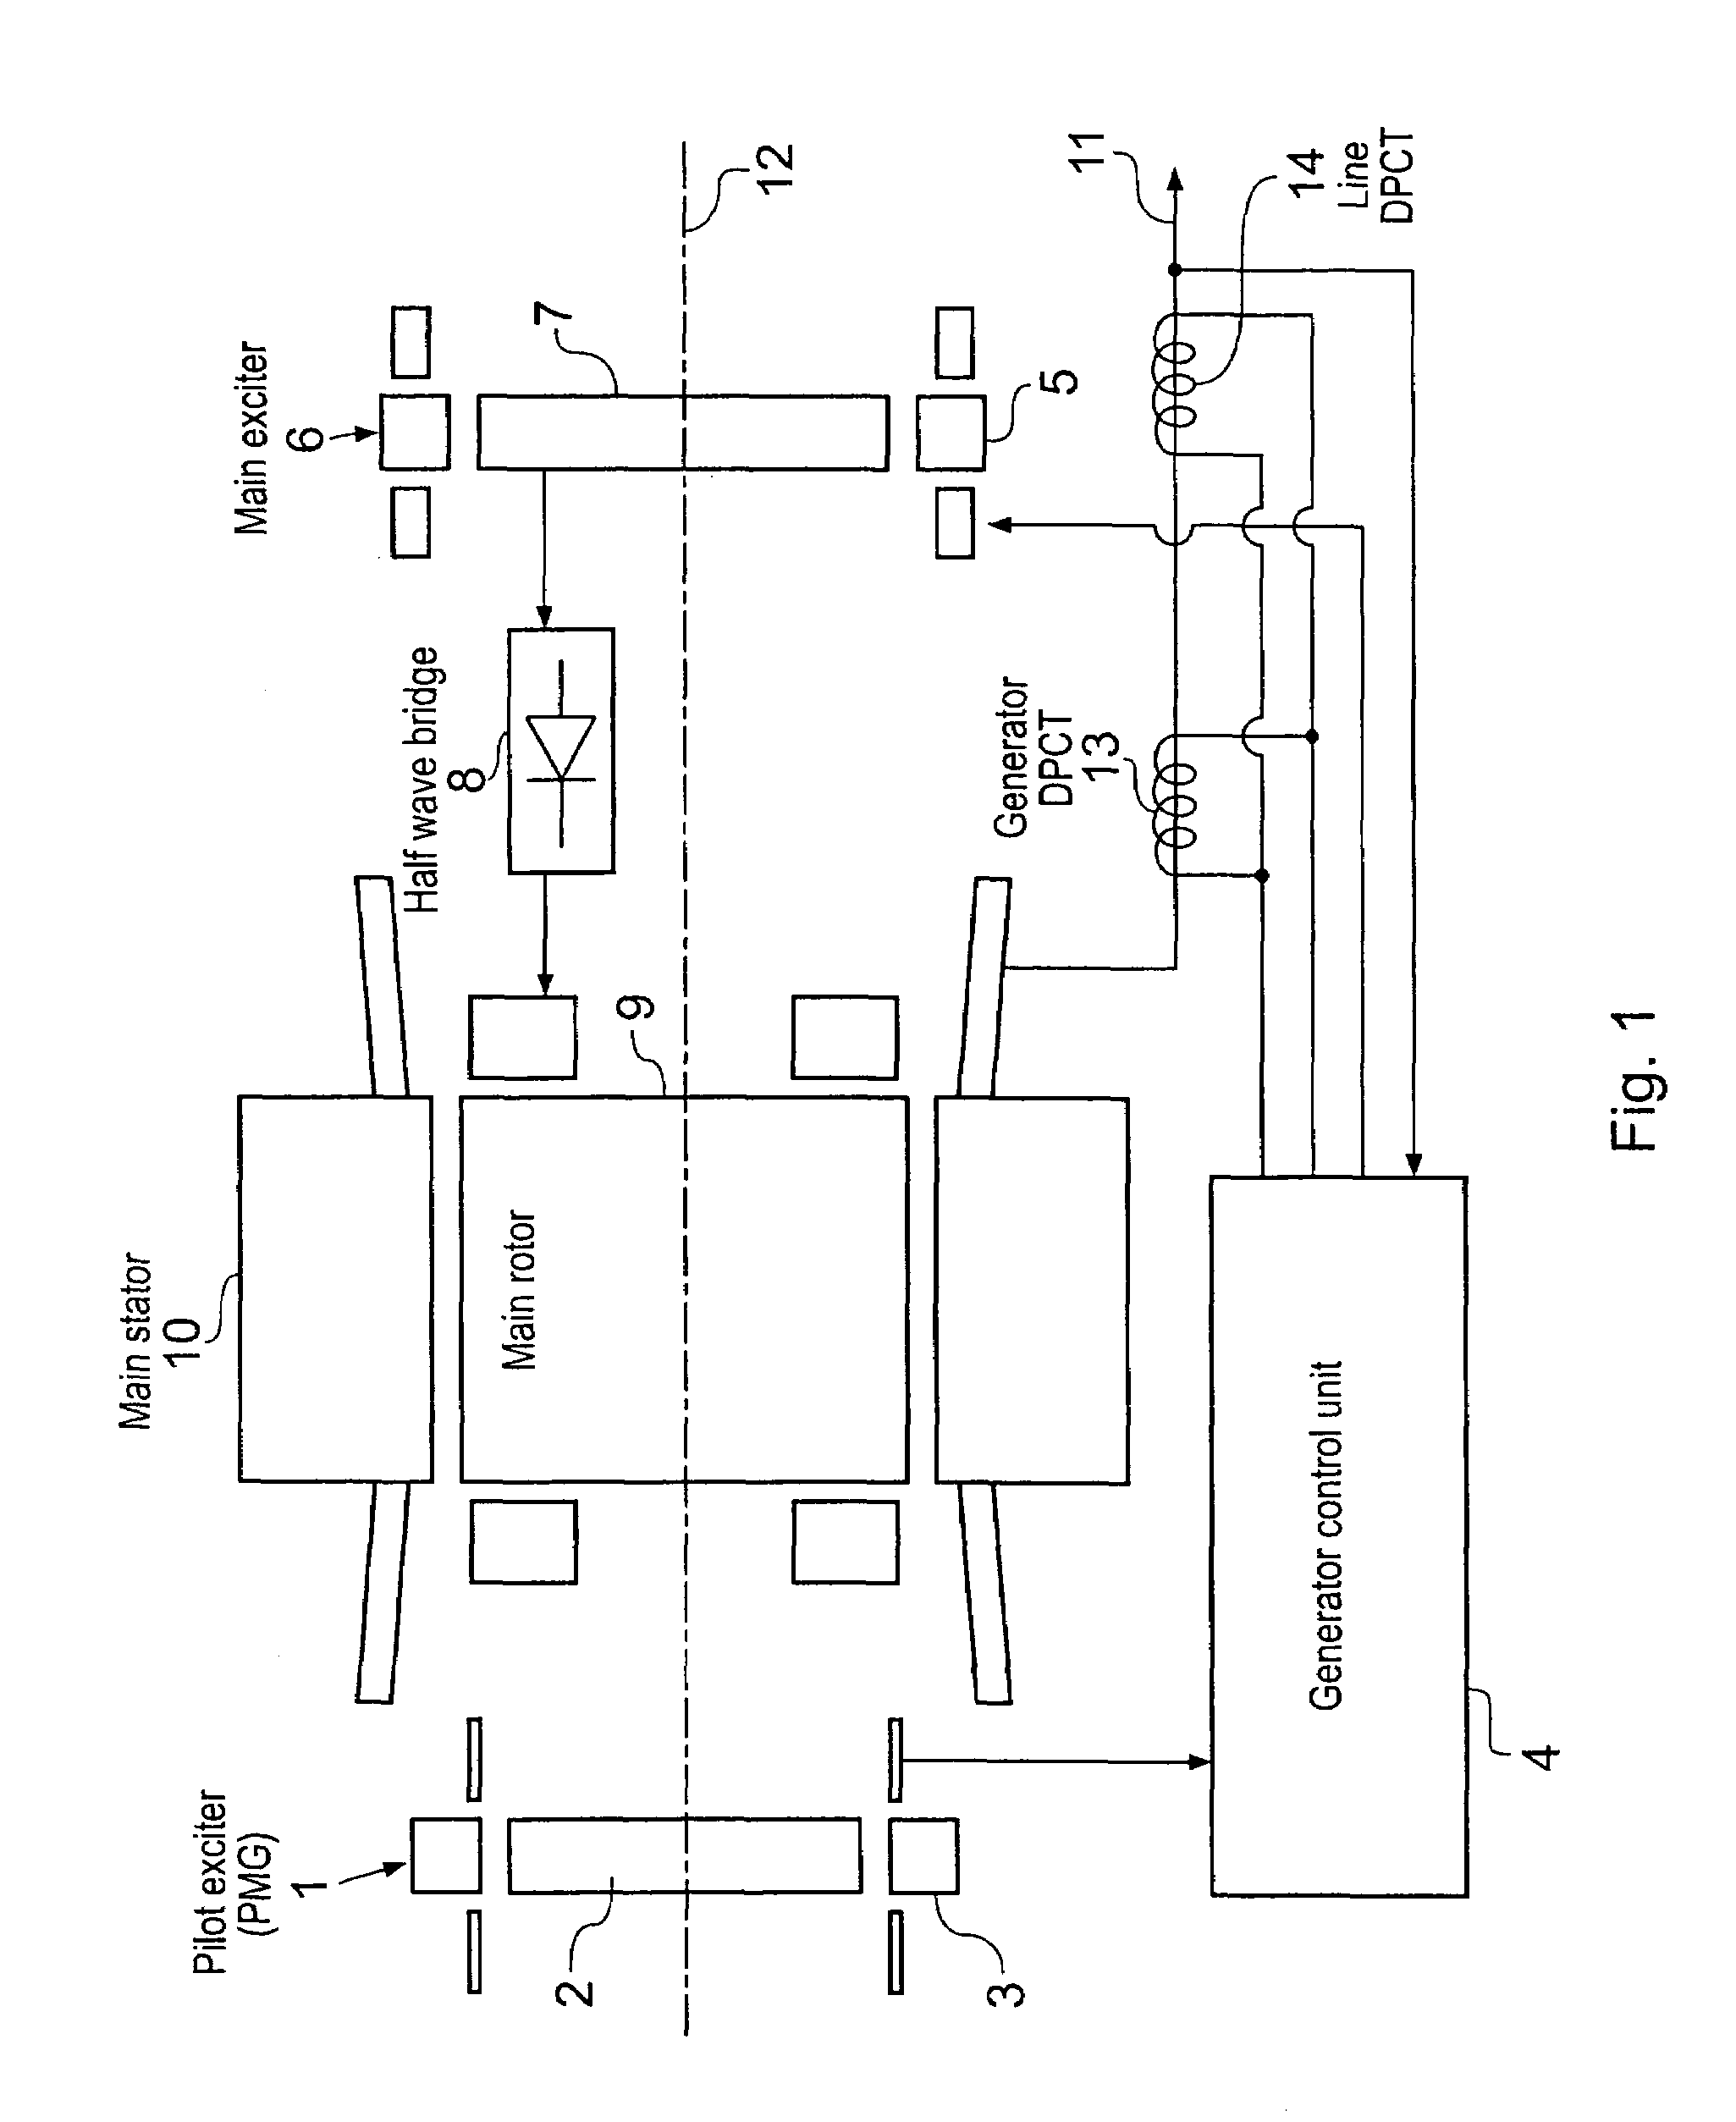 Method of and apparatus for detecting sensor loss in a generator control system